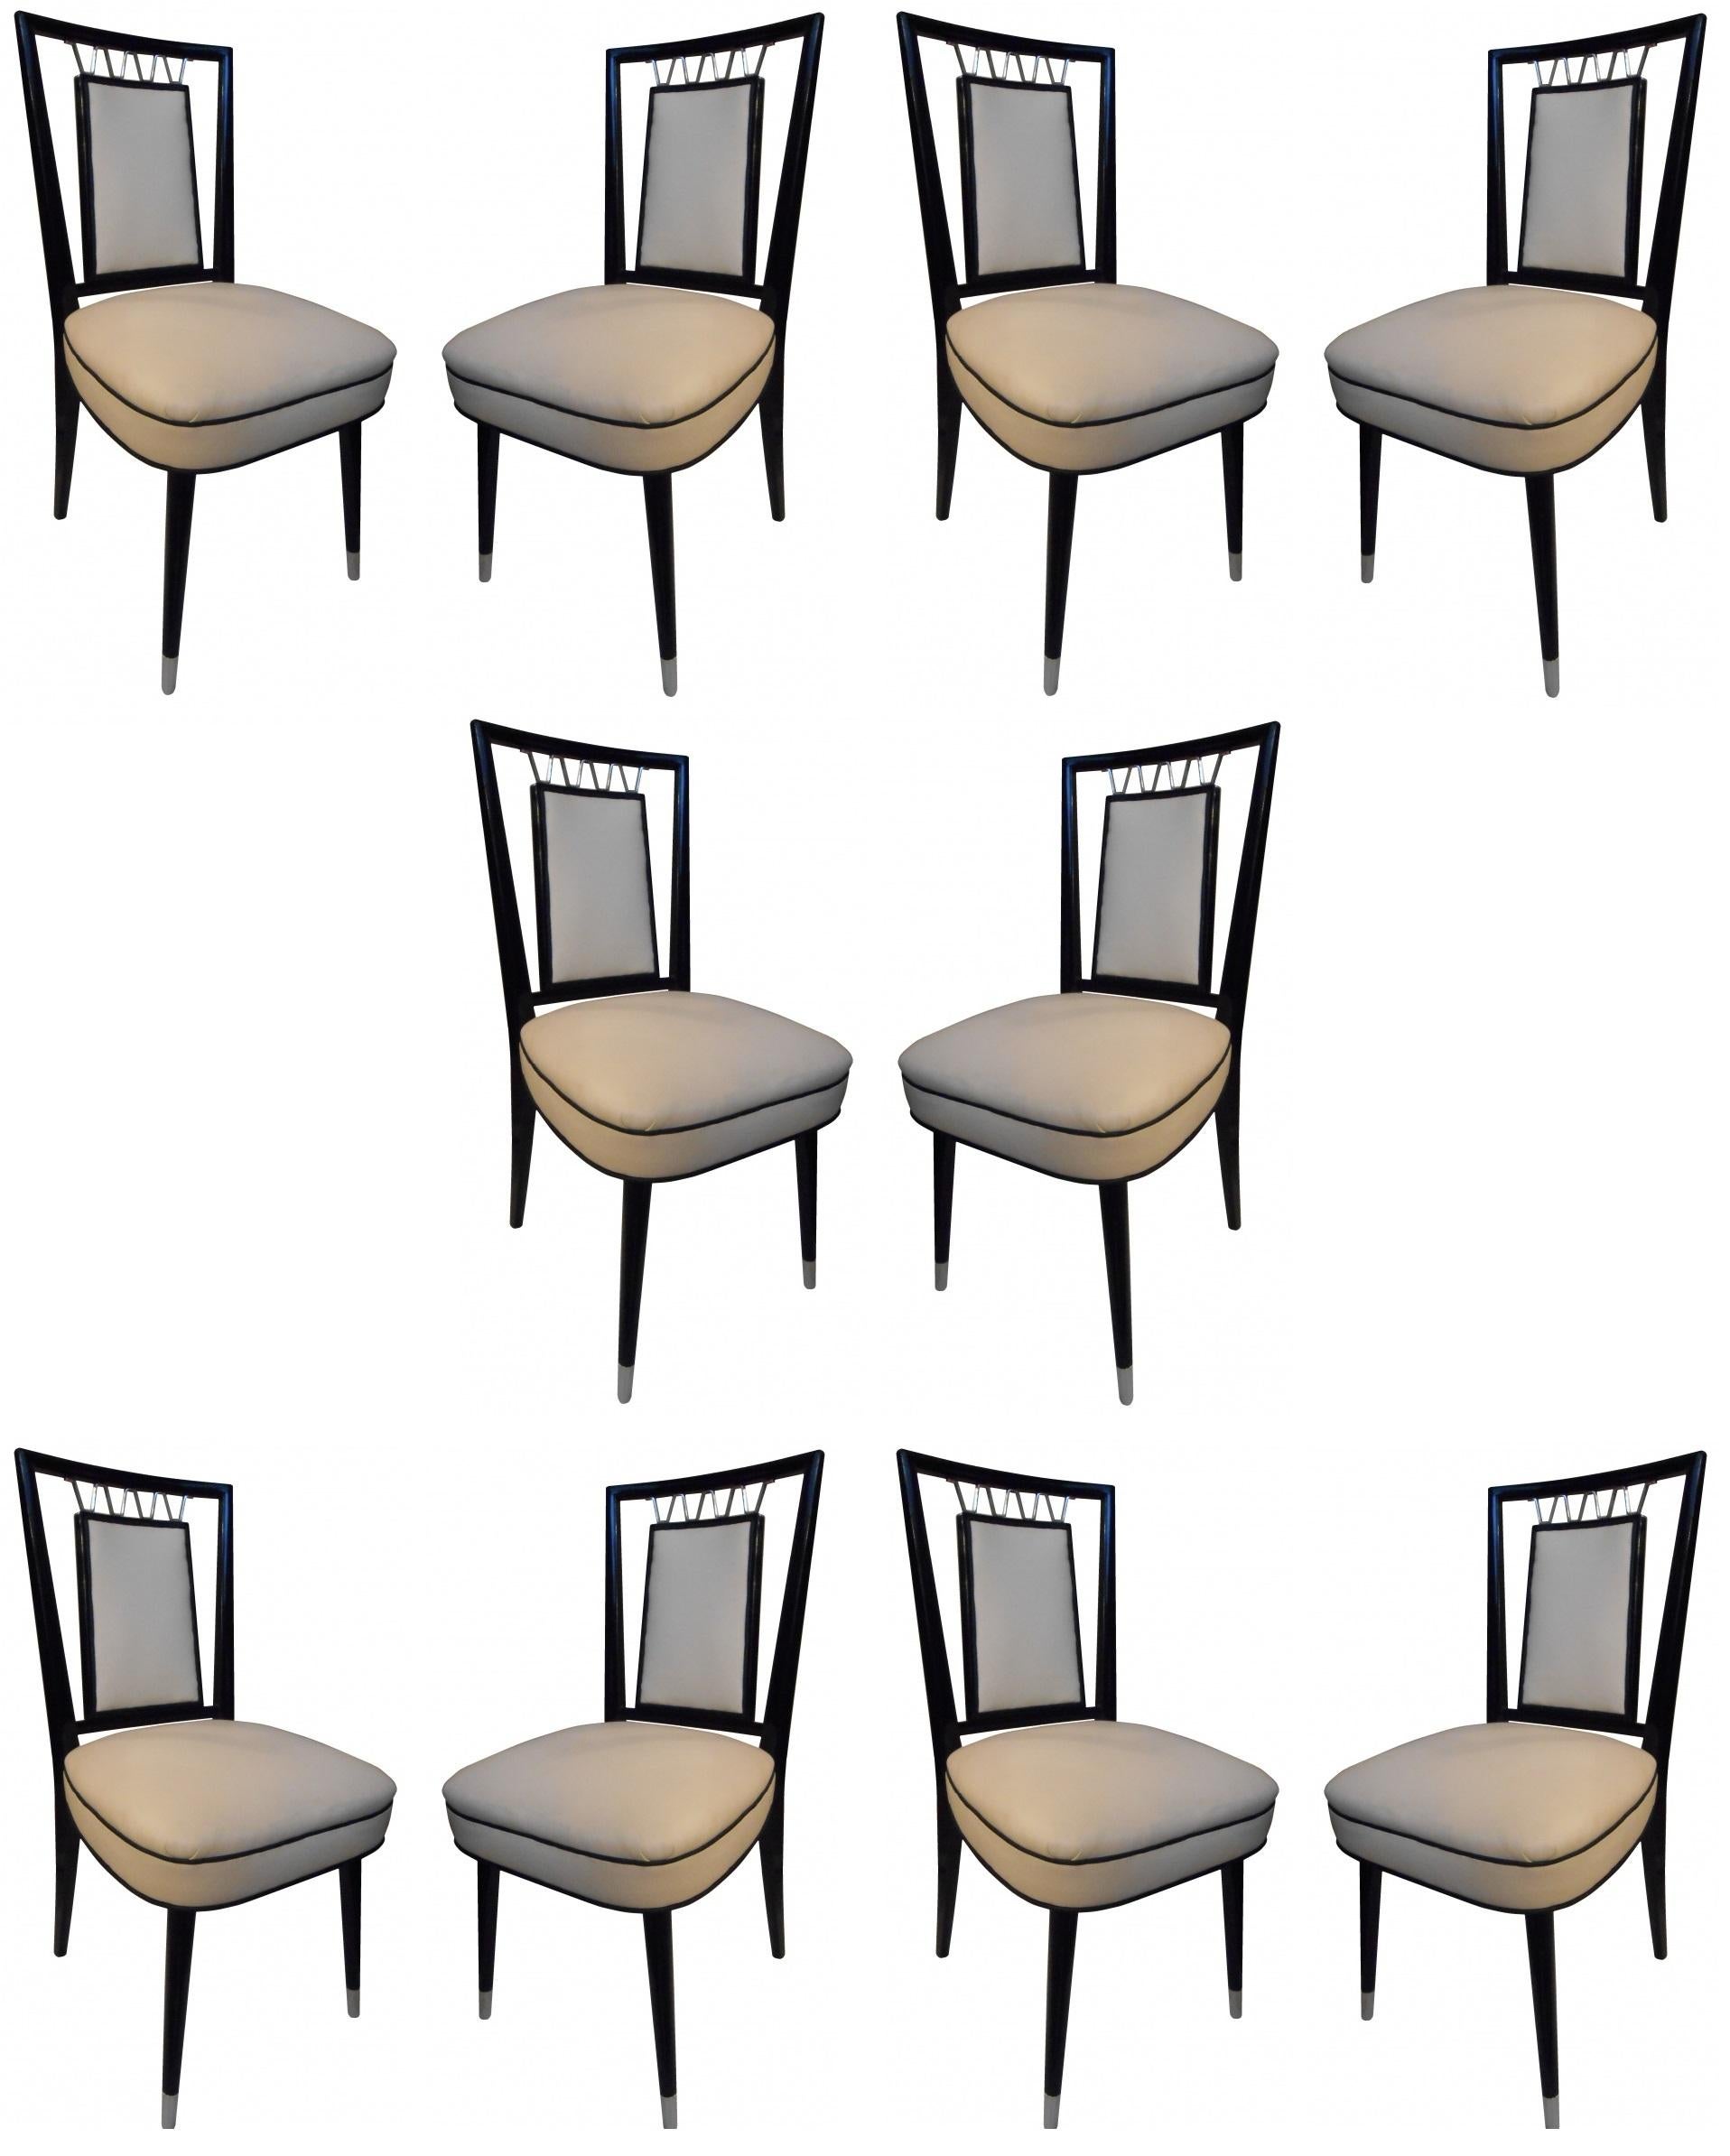 Set of 10 Chairs 60° in Leather, Bronze and Wood, Italian For Sale 5